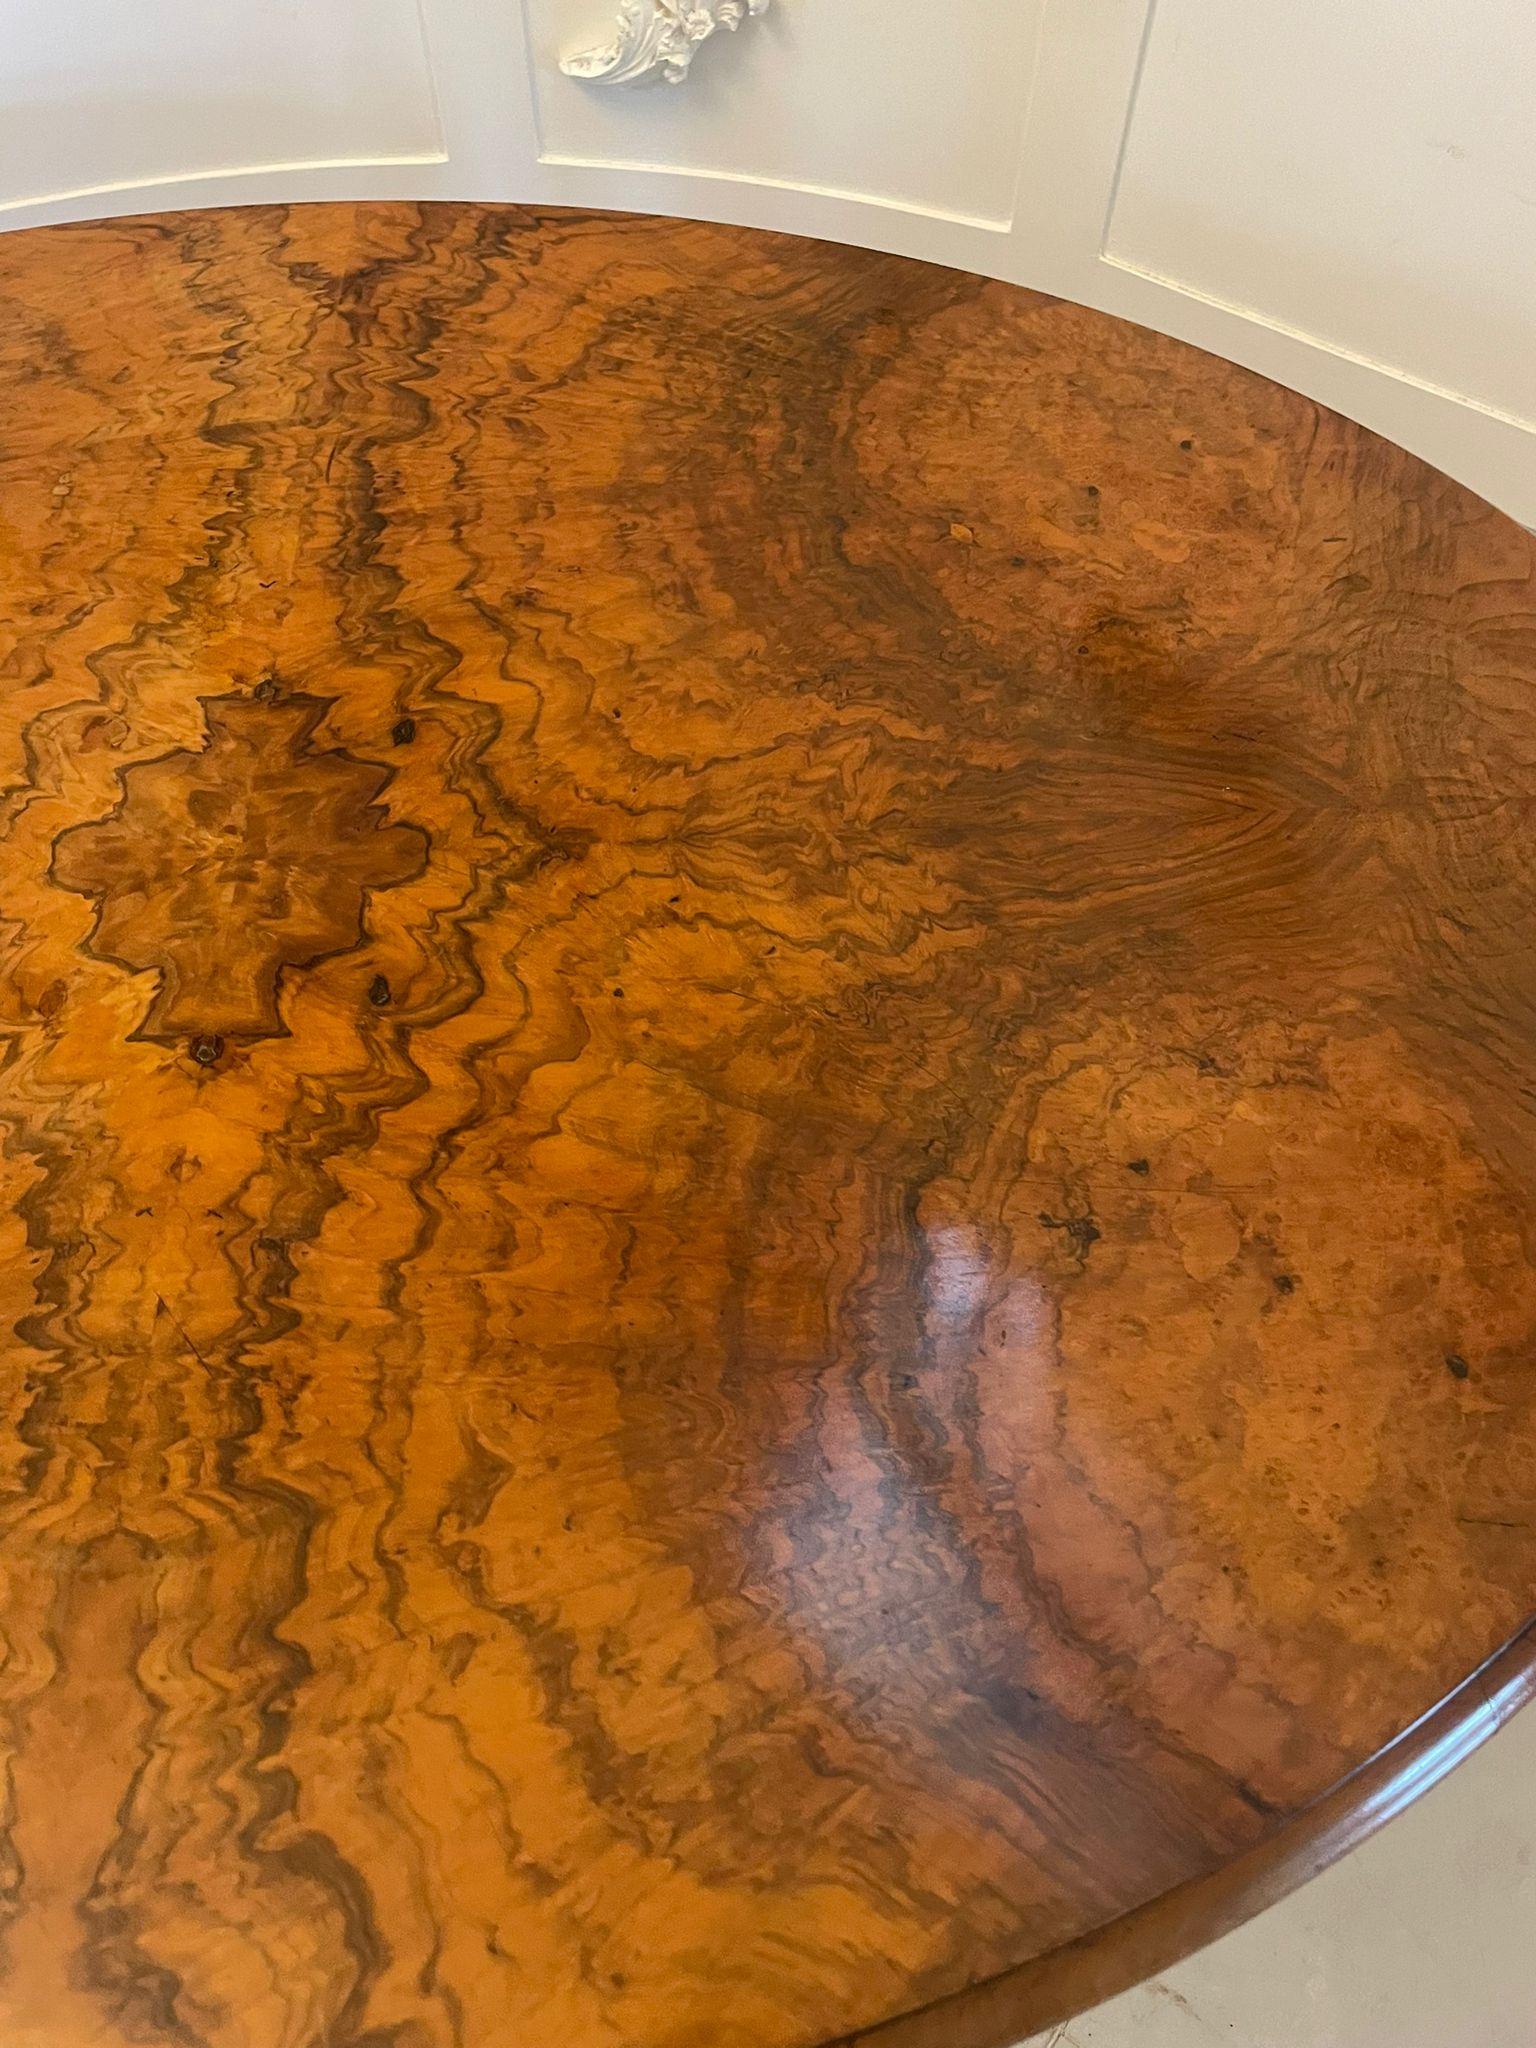 Superb quality antique Victorian oval burr walnut dining table having a superb quality burr walnut oval top with a thumb moulded edge supported by a carved solid walnut pedestal column standing on four shaped carved cabriole legs with scroll feet